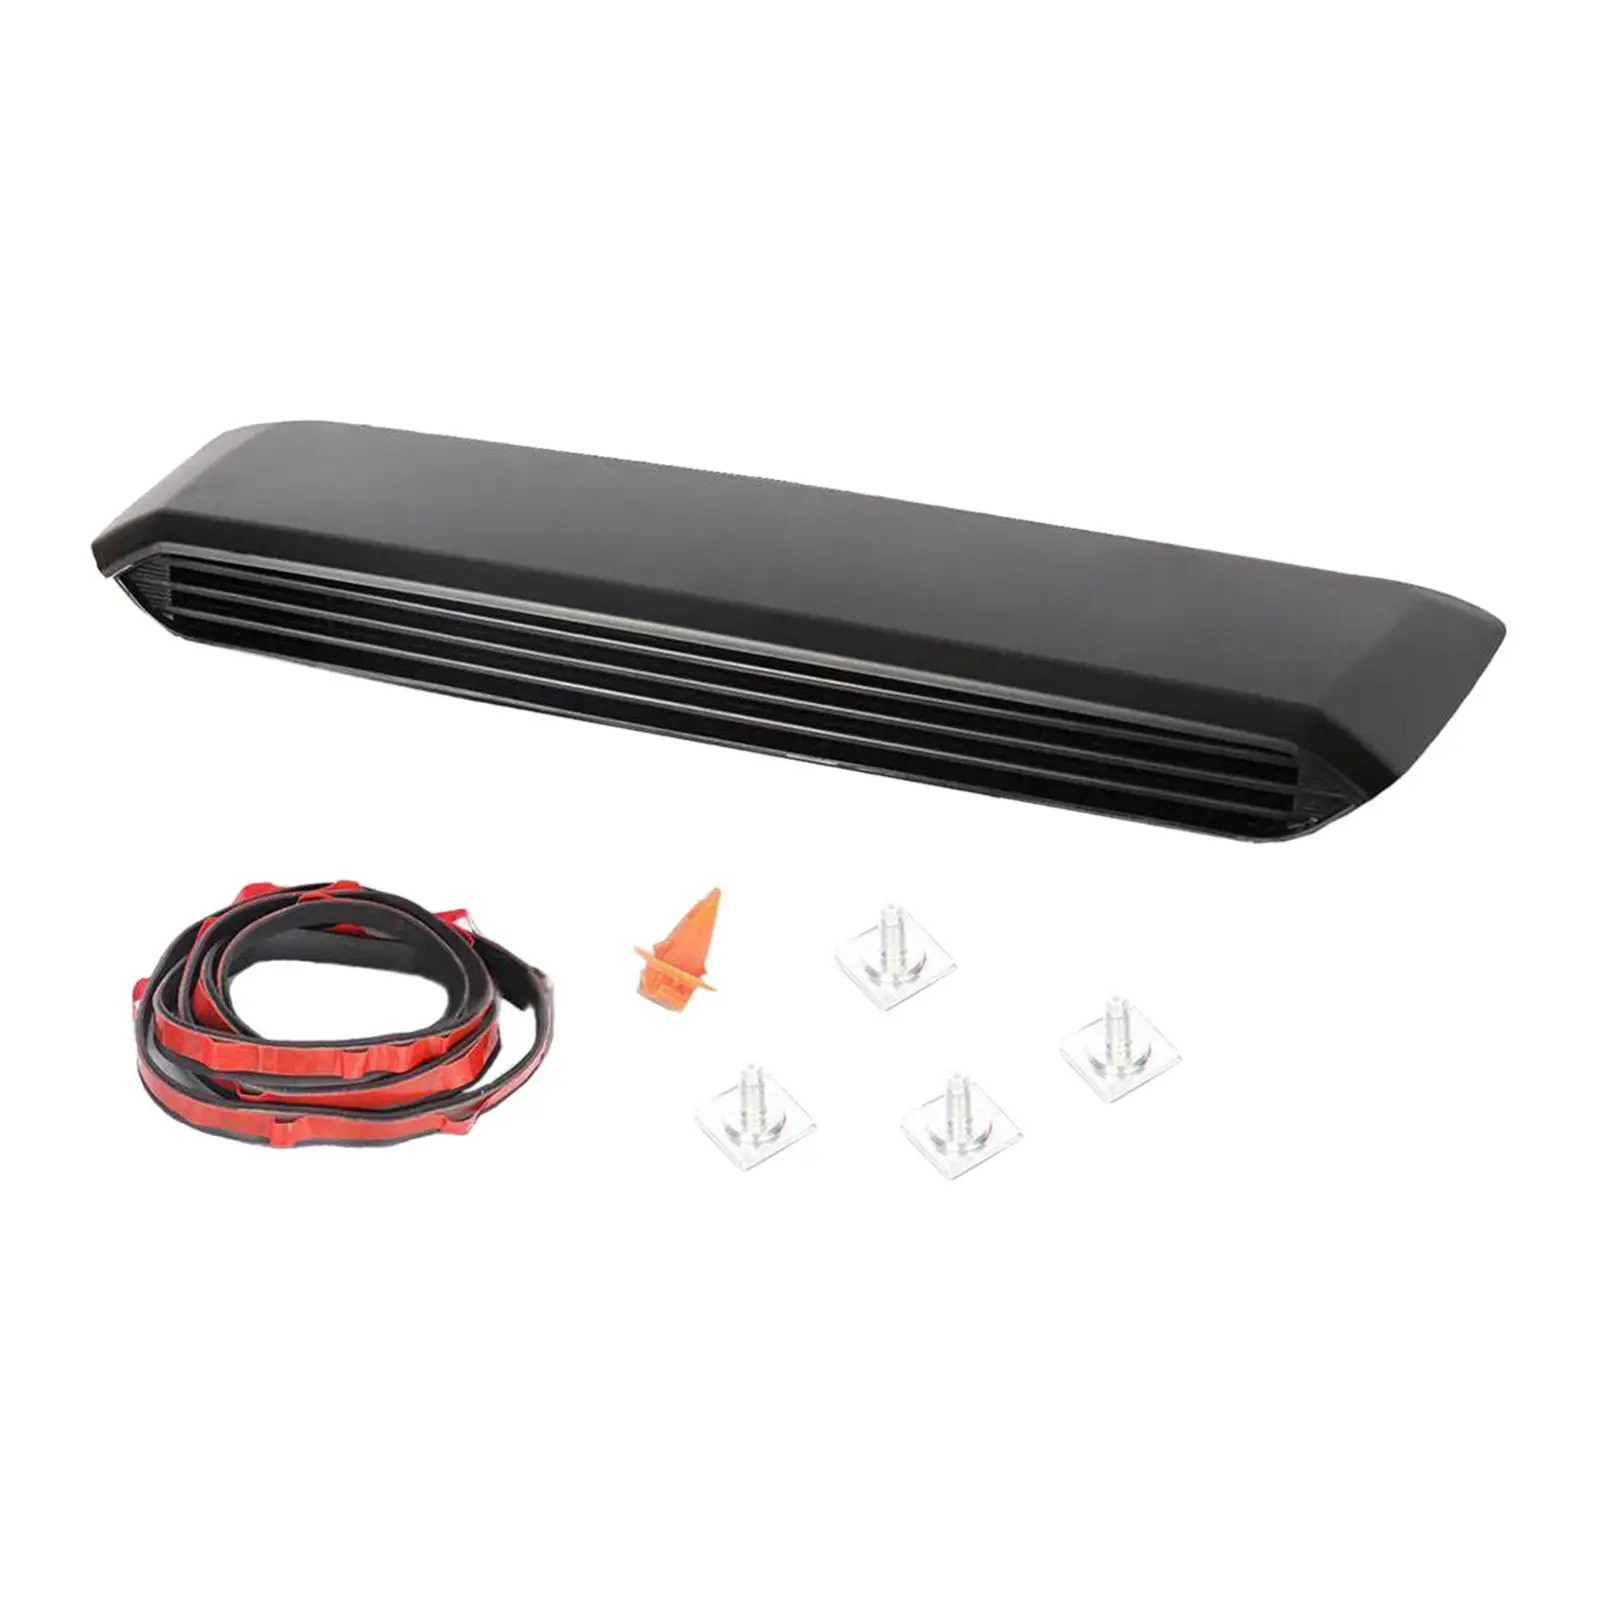 76181-04900, Hood Scoop Kit, High Performance, Premium, Easy to Install Spare